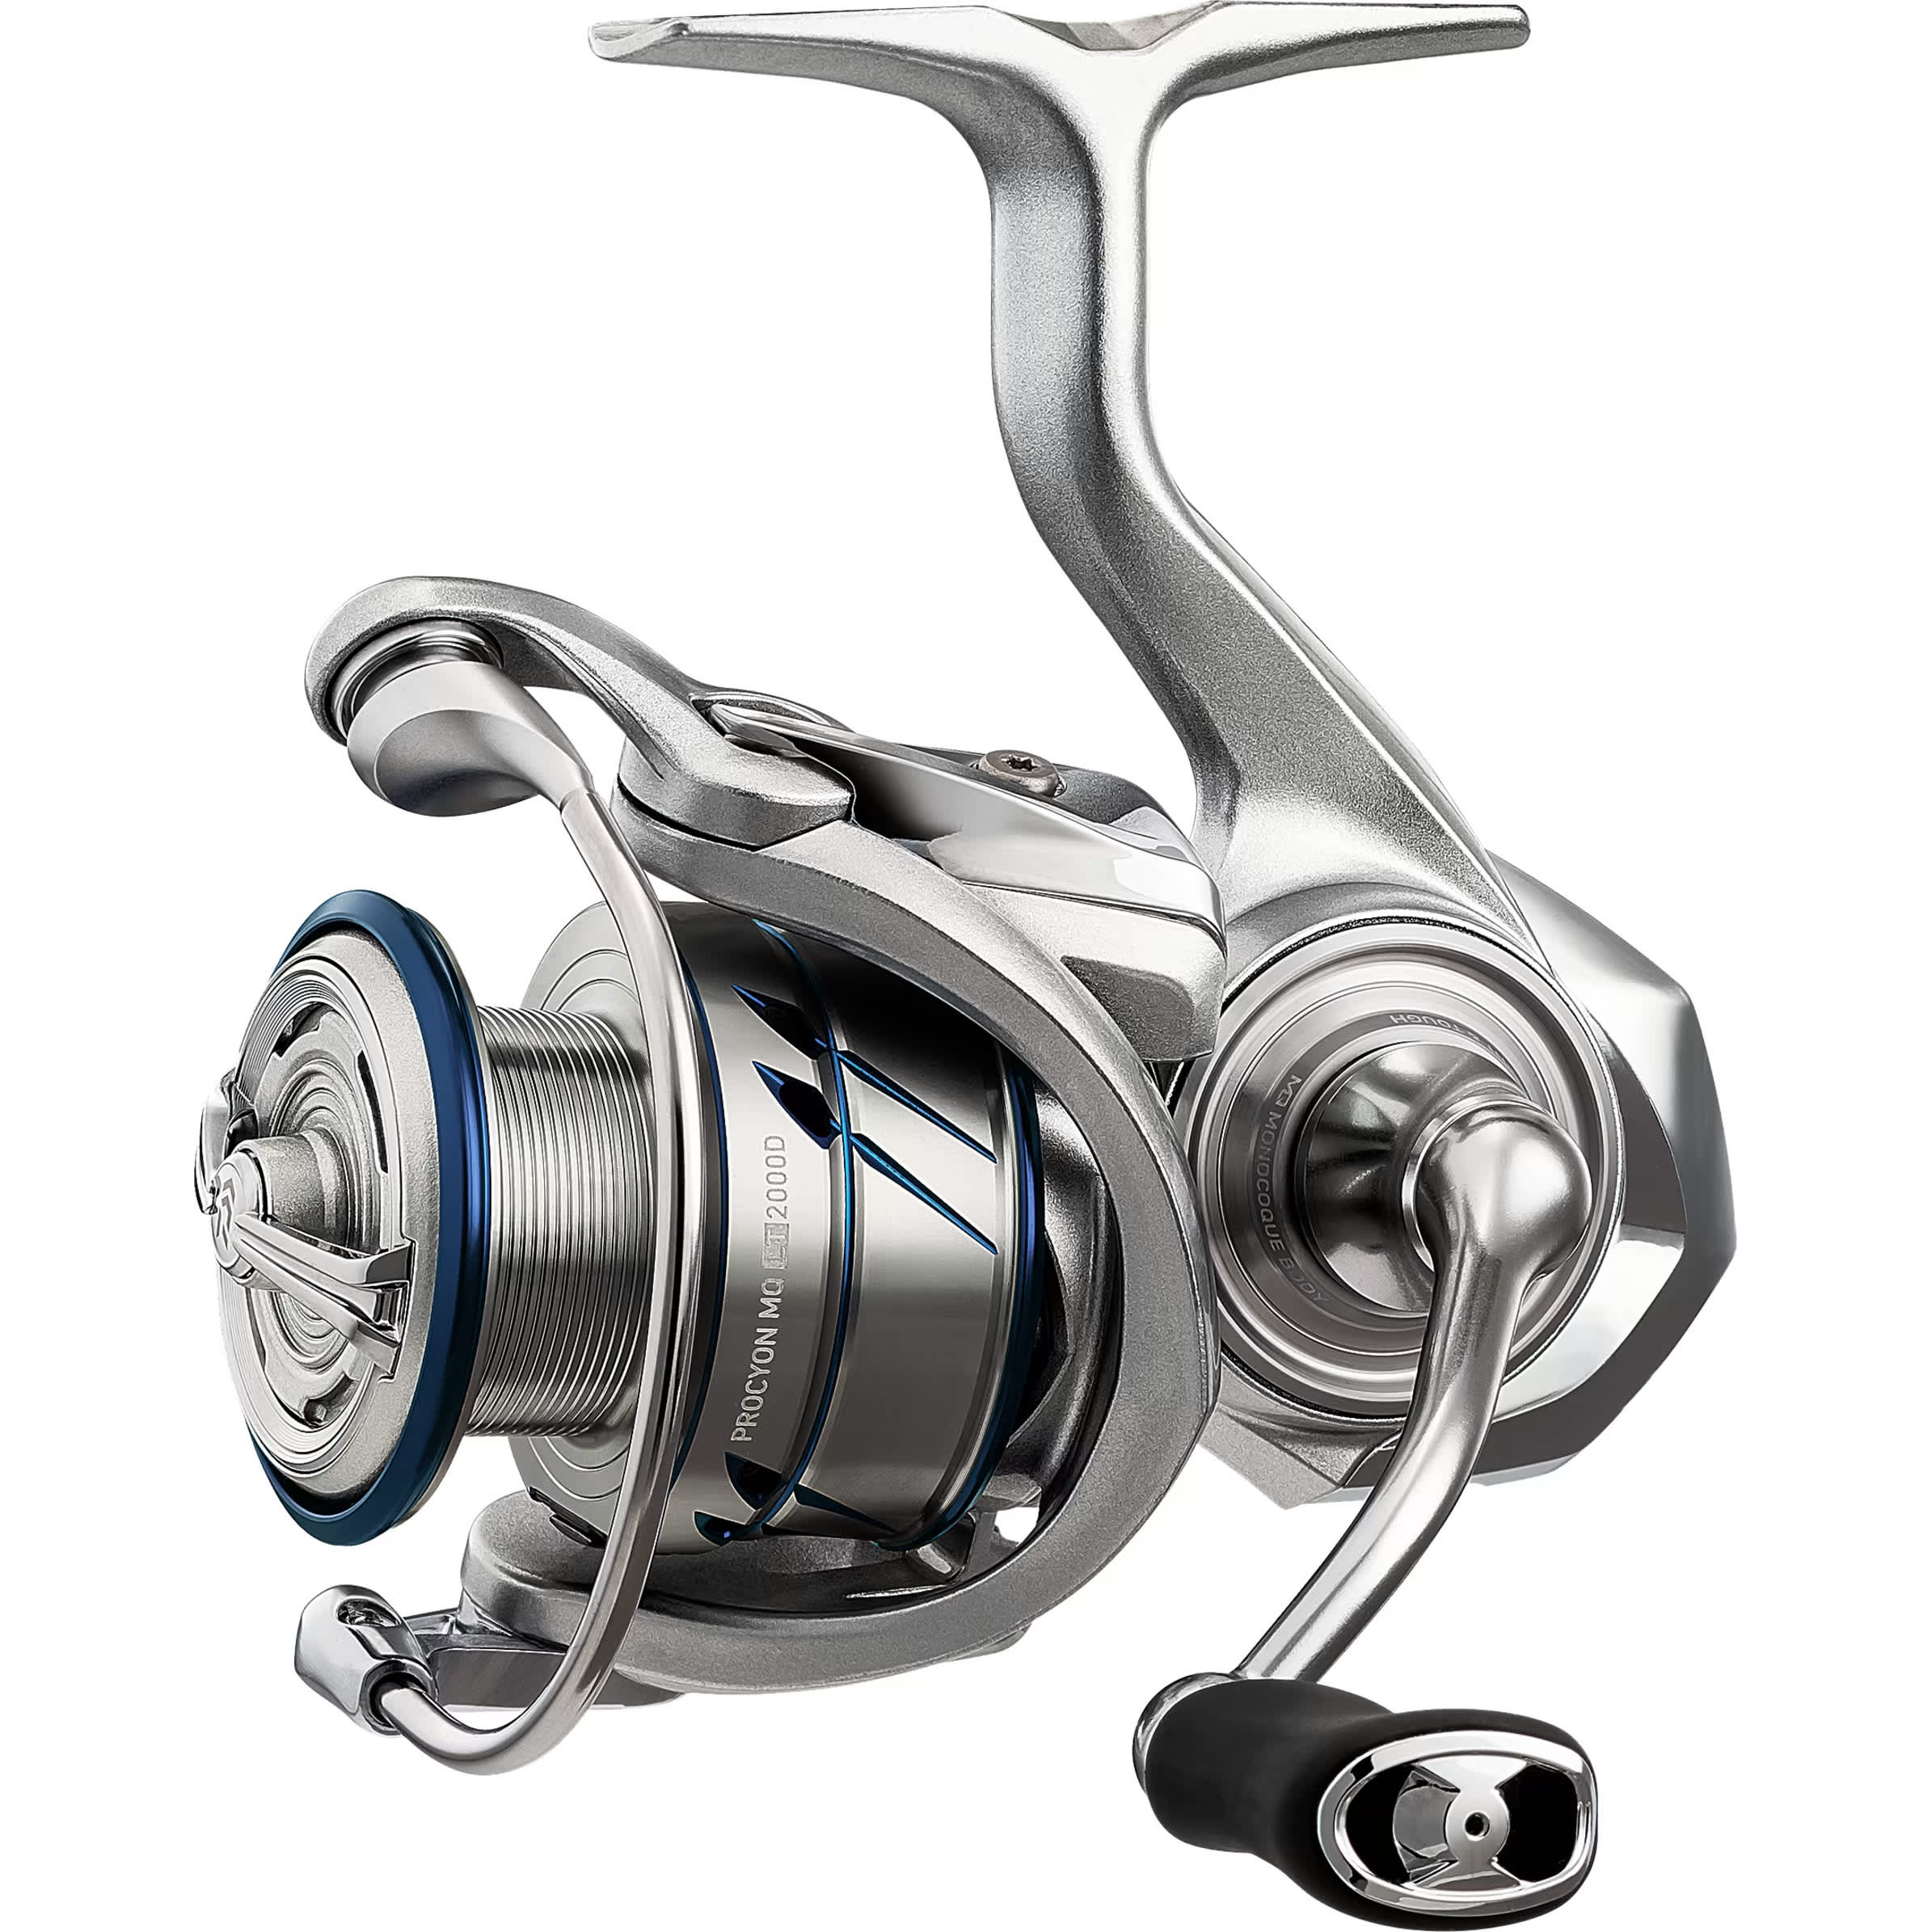 The best reel seat I've ever used. I'm a huge fan of the Daiwa